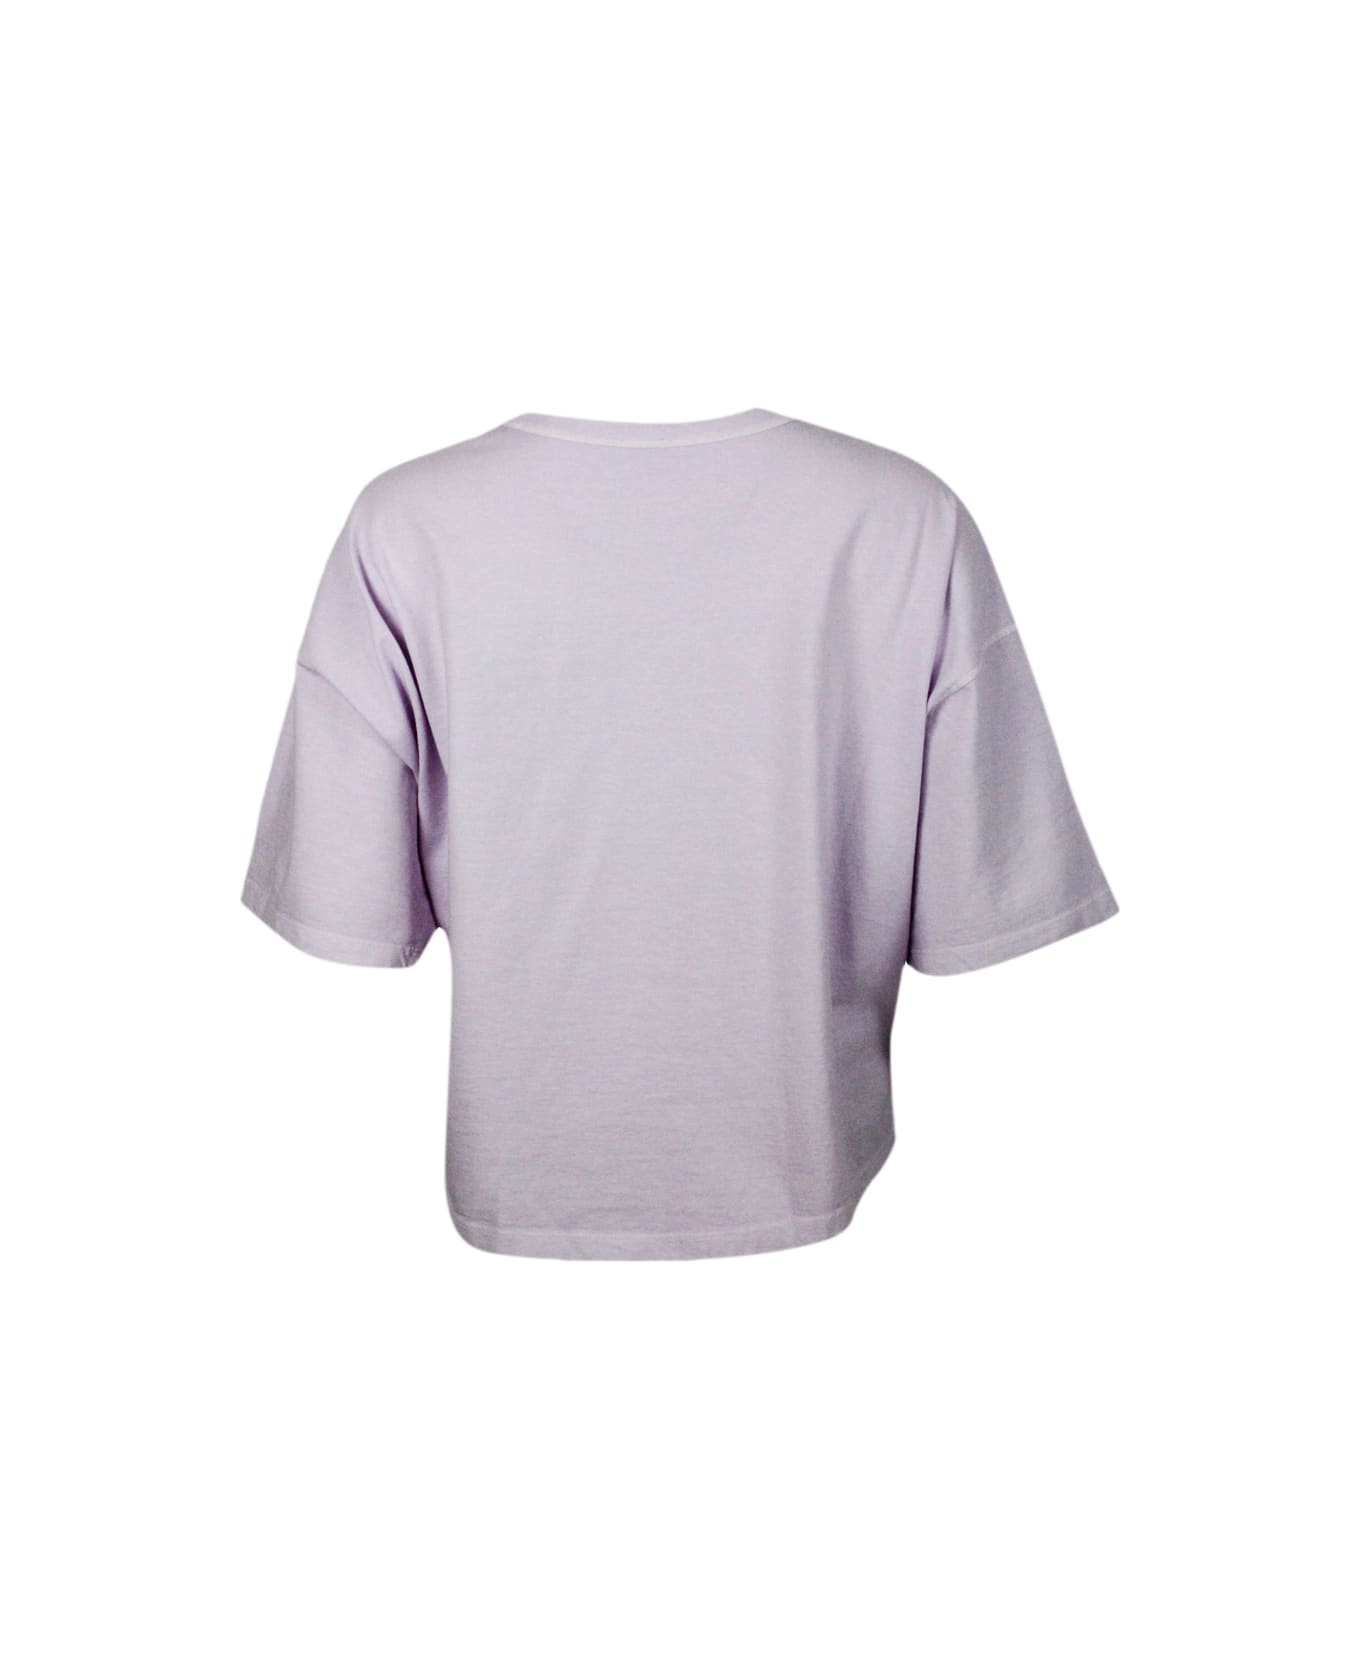 Malo Crew-neck, Short-sleeved T-shirt In 100% Soft Cotton, With An Oversized Fit And Vents On The Sides - Blu wisteria Tシャツ